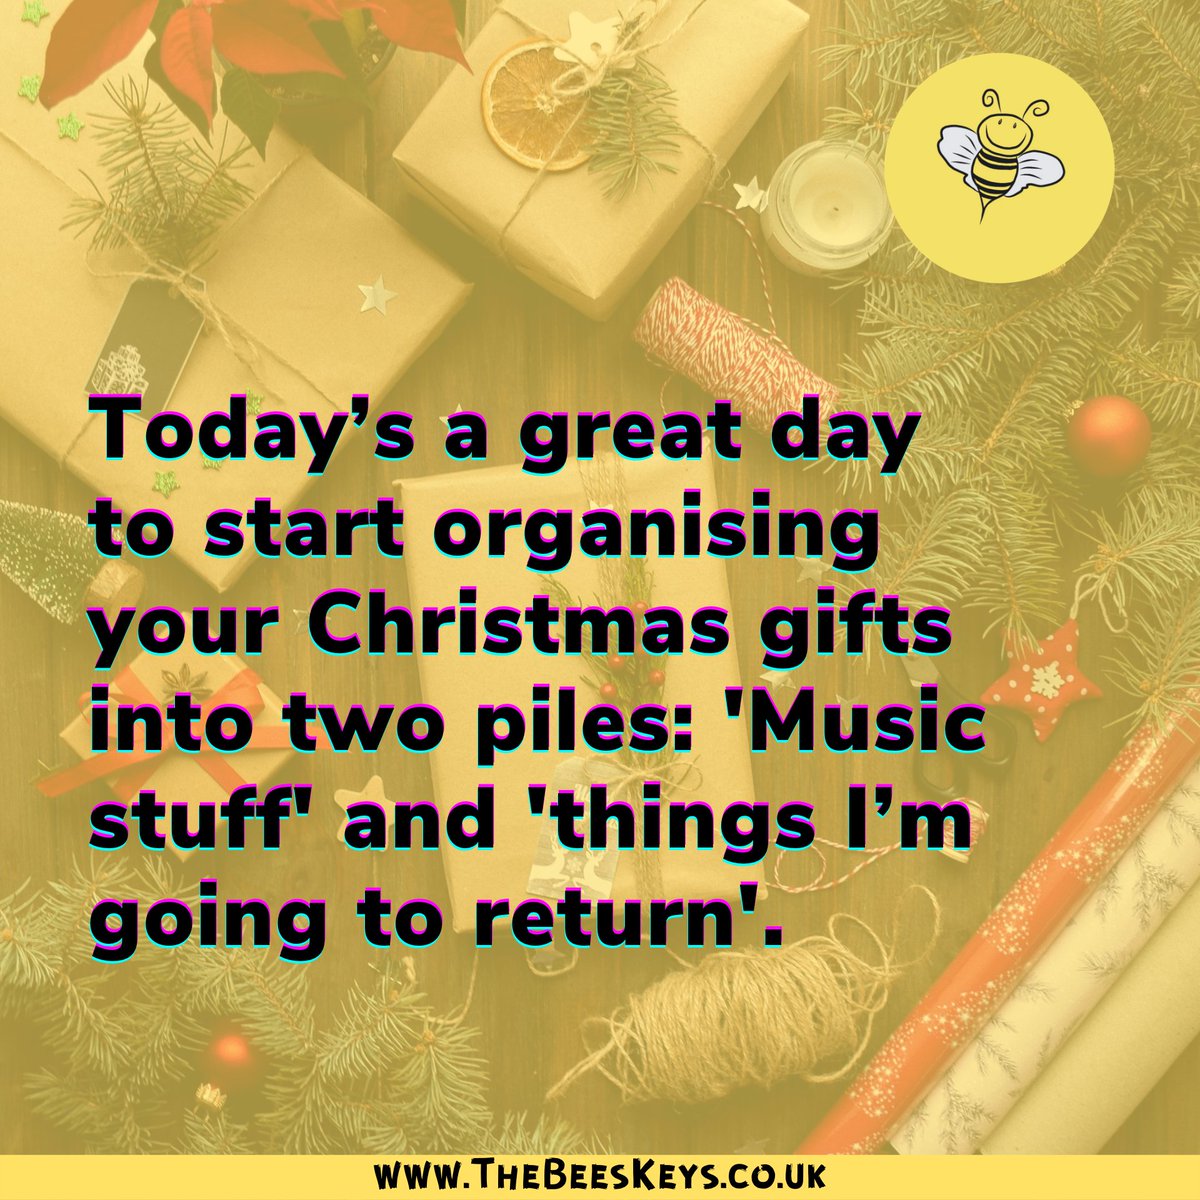 Tell me all about your musical gifts! 

#TheBeesKeys #PianoLessonsInSwindon #OnlinePianoLessons #PianoLessons🎹
 #StudentStars #LoveMyJob #TheBeesKnees #PractiseMakesPerfect #OnlinePianoLessons #WorldwidePianoLessons #PractiseWin #PianoTeacher #PianoTeacherLife #GiftOfMusic